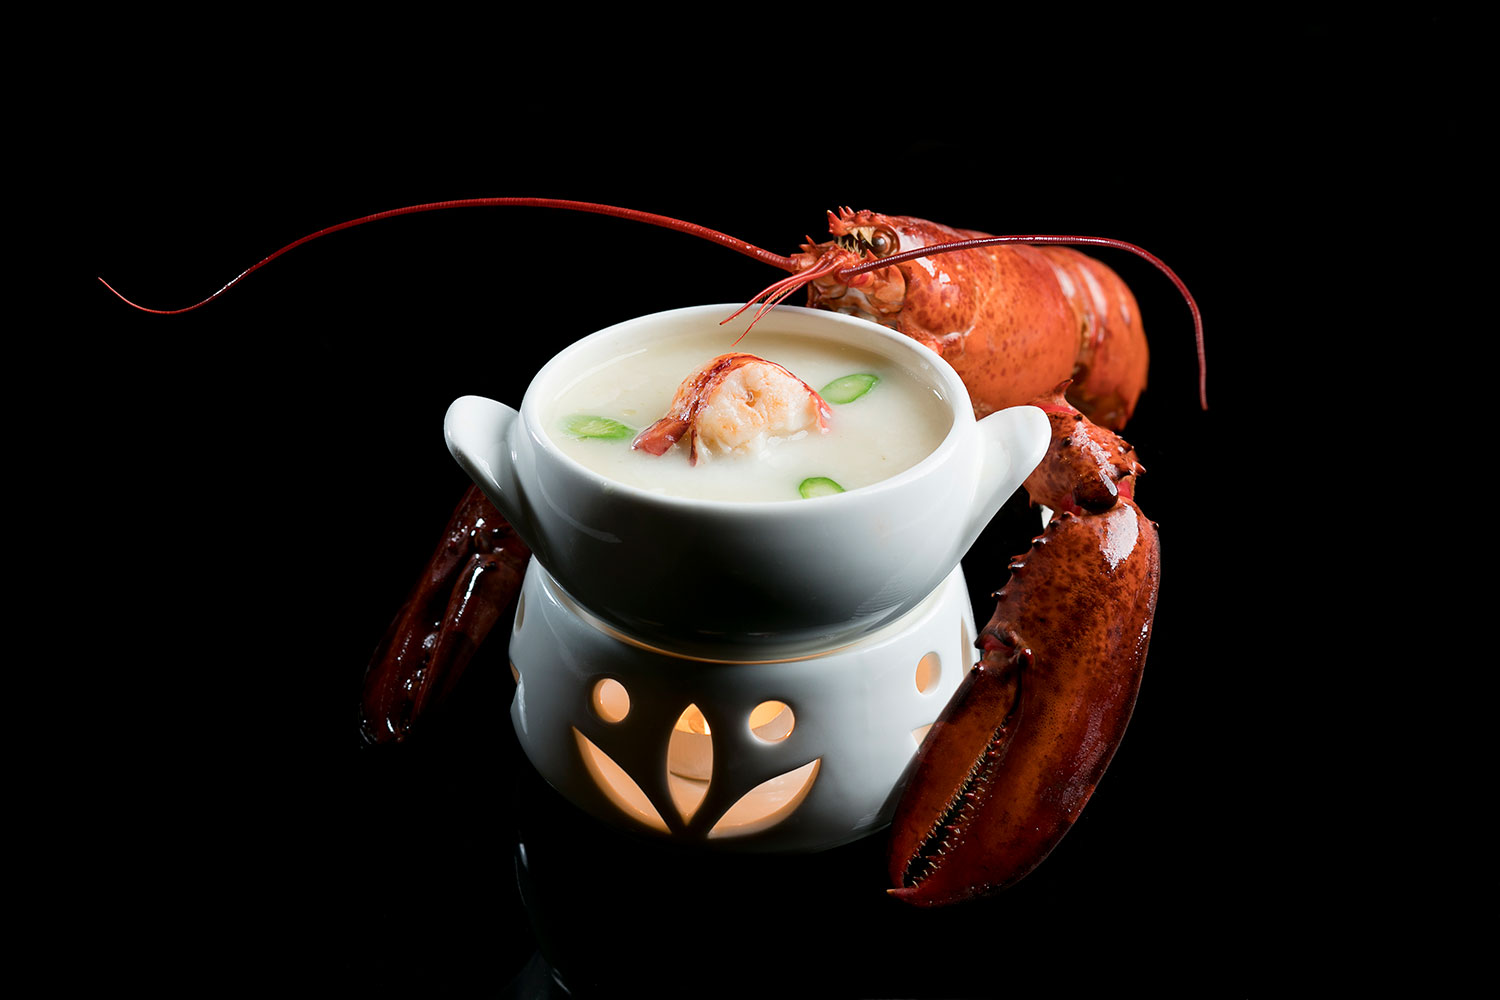 Double boiled MSC Maine Lobster and Organic ASC Prawn in Superior Fish Broth